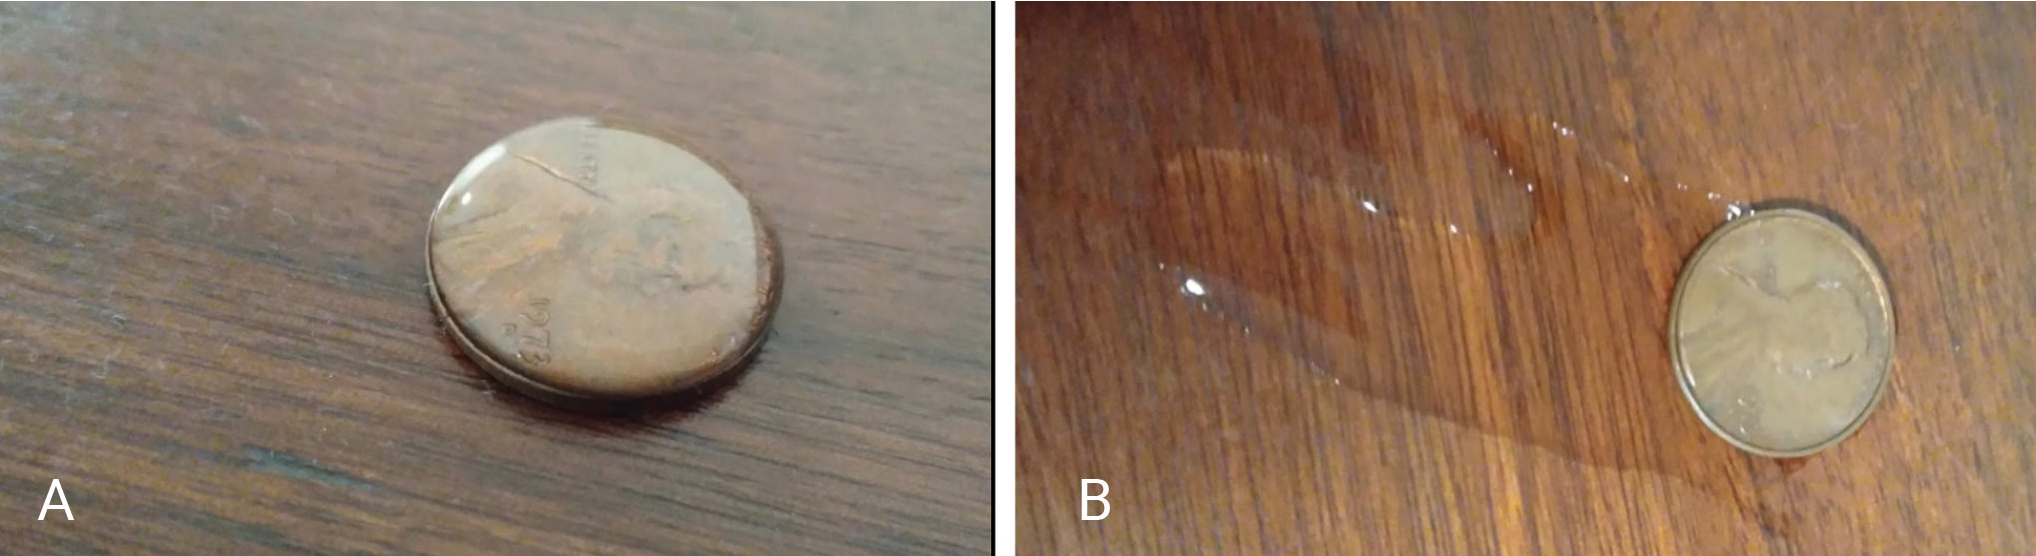 Figure 3  Example from surface tension experiment. (A) Example of a penny holding several drops of liquid in a “bubble”; (B) the coin after enough drops have been added to break the surface tension of the “bubble” of liquid.